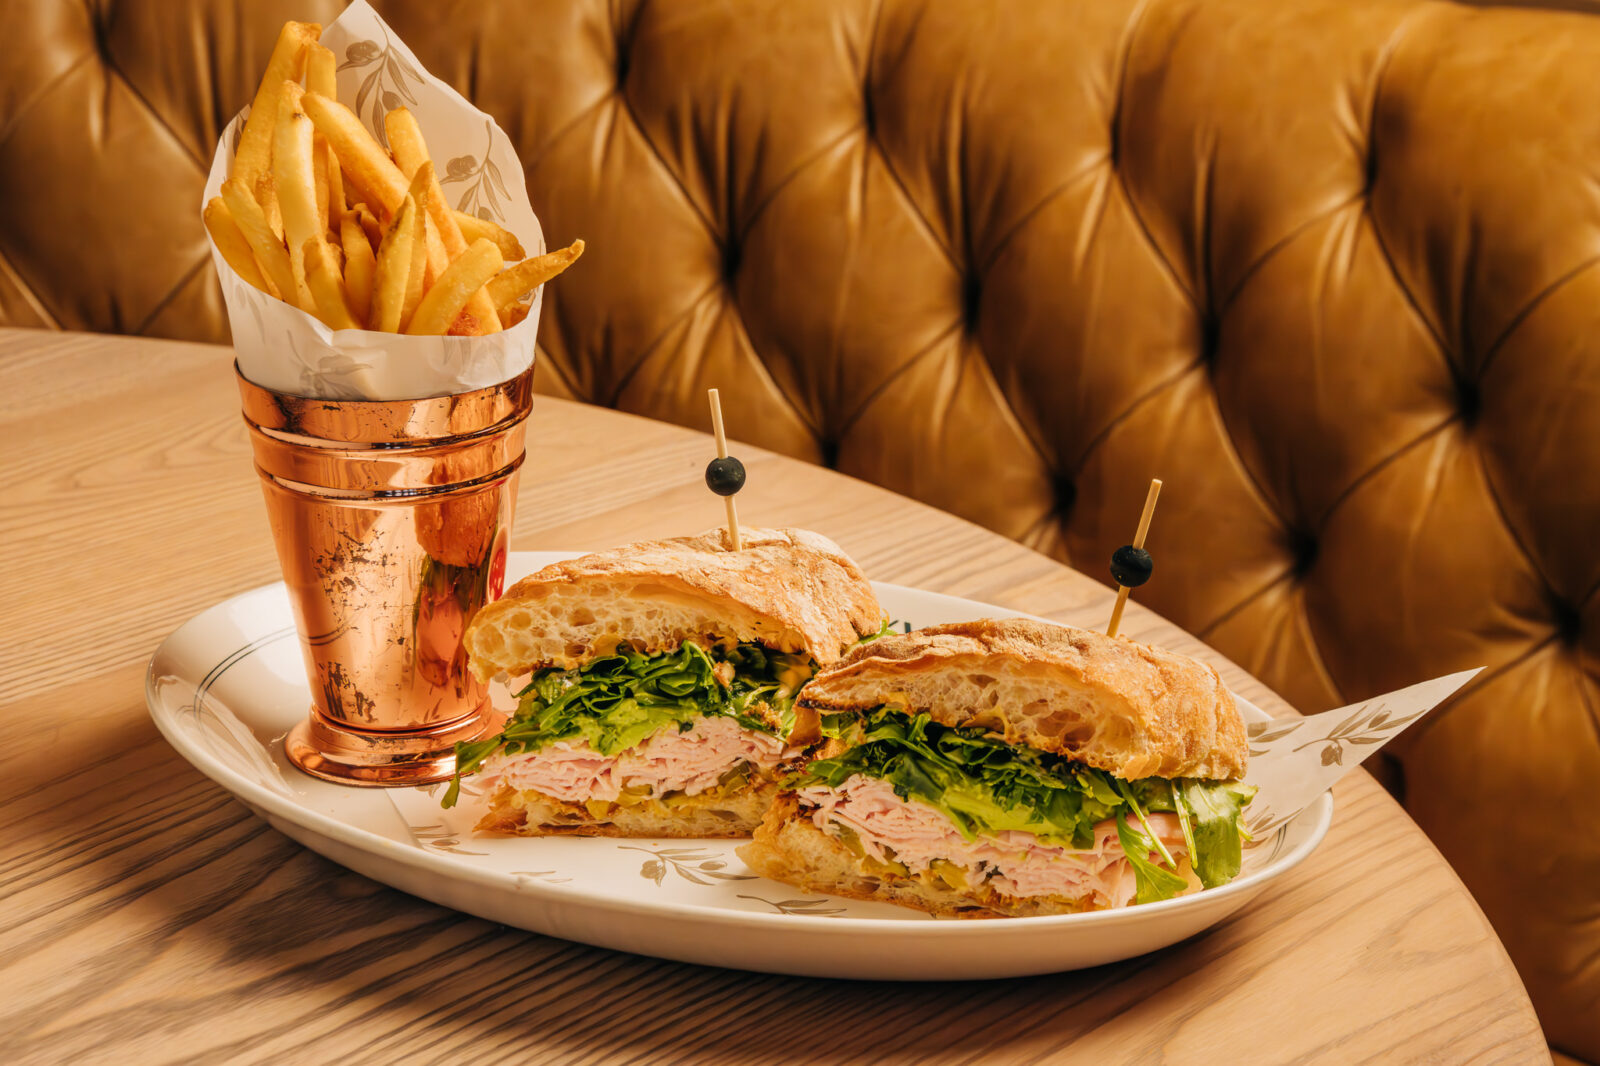 The Oakville's Hobbs Turkey and Avocado Sandwich served with fries available for carryout and delivery